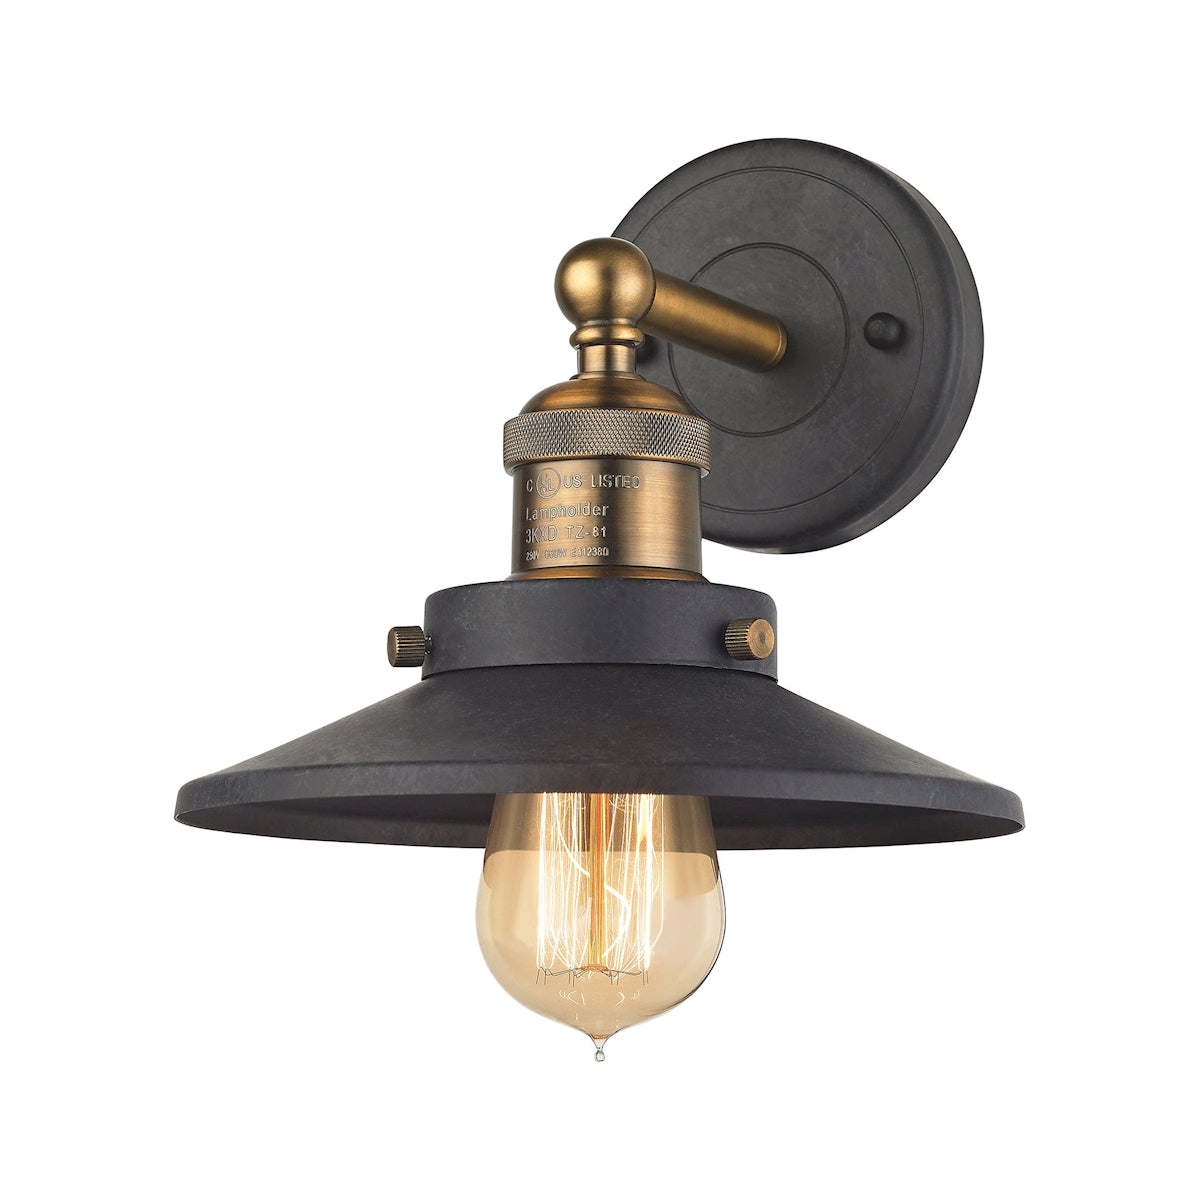 ELK Lighting 67180/1 English Pub 1-Light Vanity Lamp in Antique Brass and Tarnished Graphite with Metal Shade